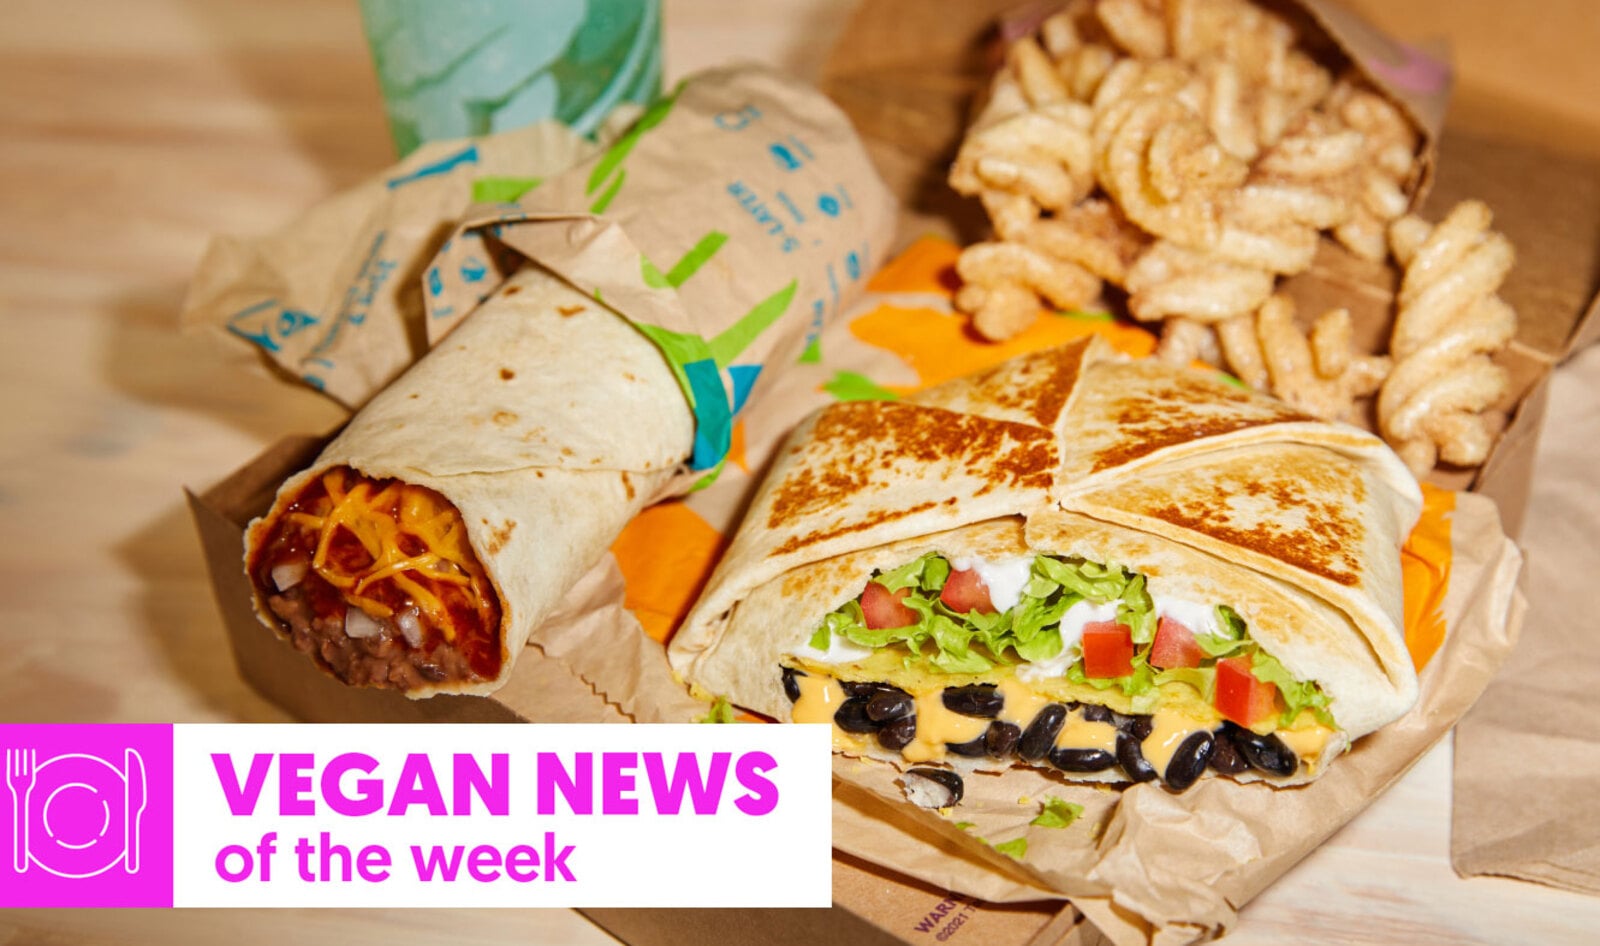 Vegan News of the Week: Taco Bell's Veg Value Meal, Impossible Corn Dogs, and More